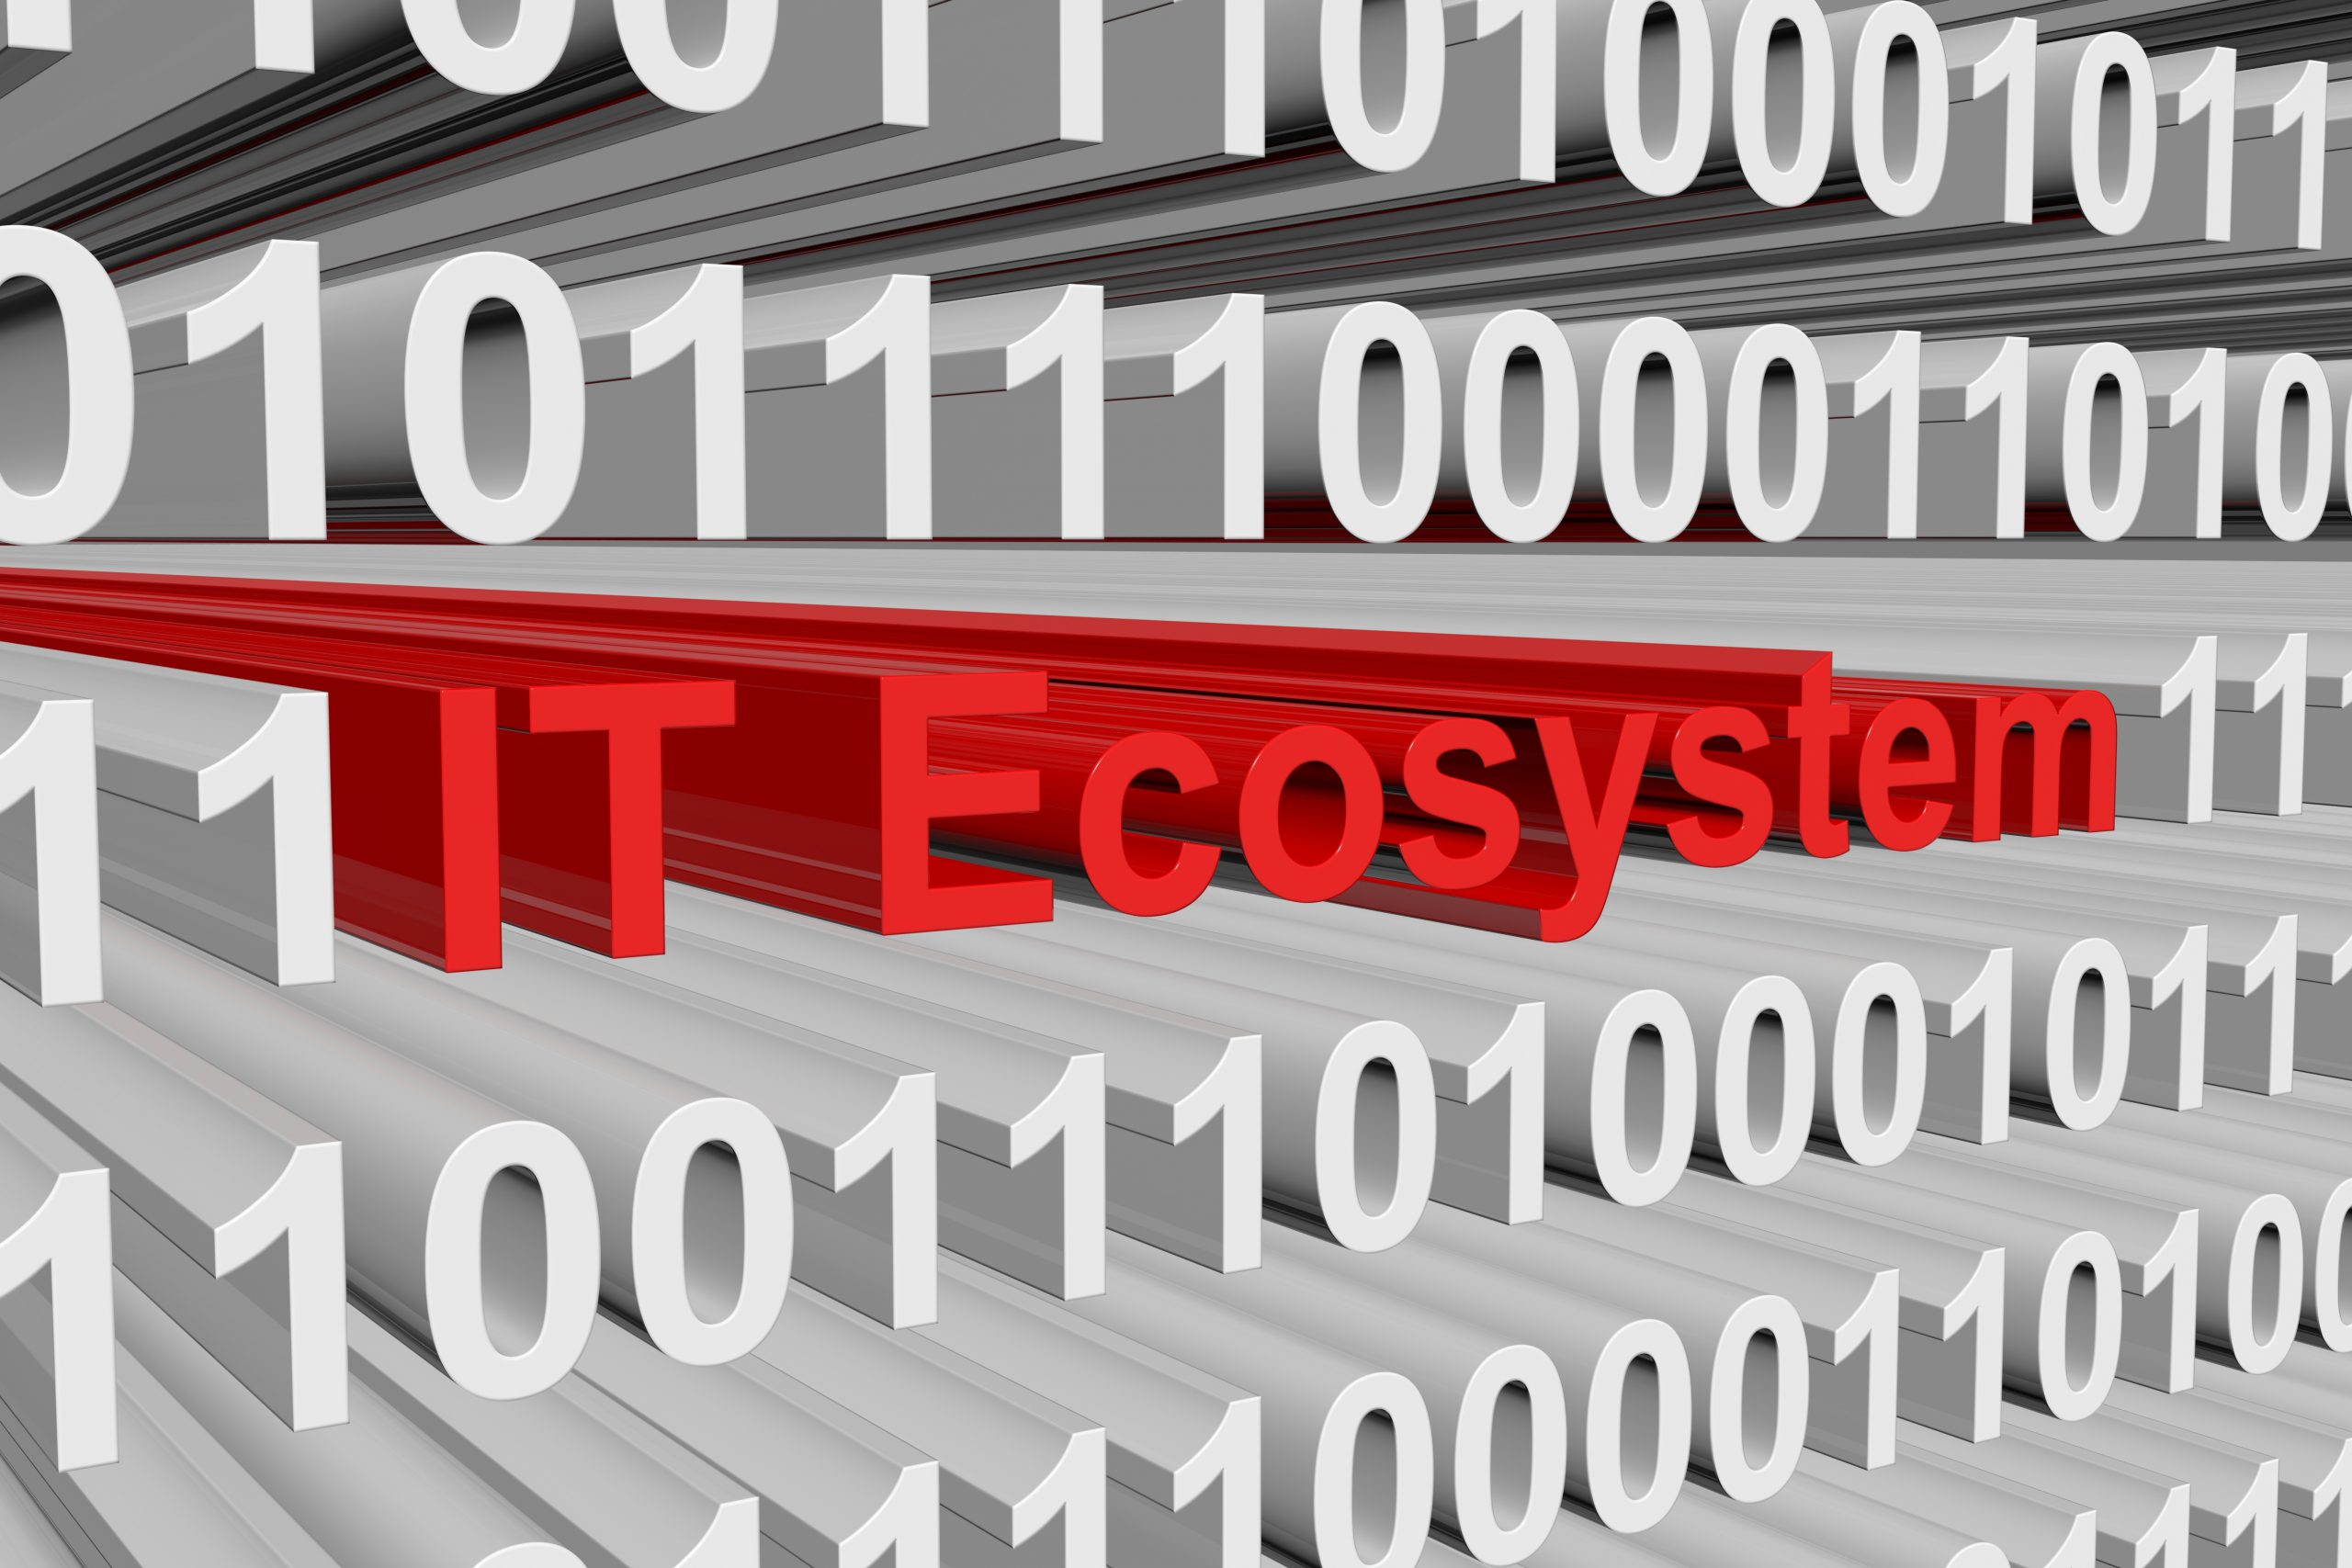 The IT Ecosystem is presented in the form of binary code